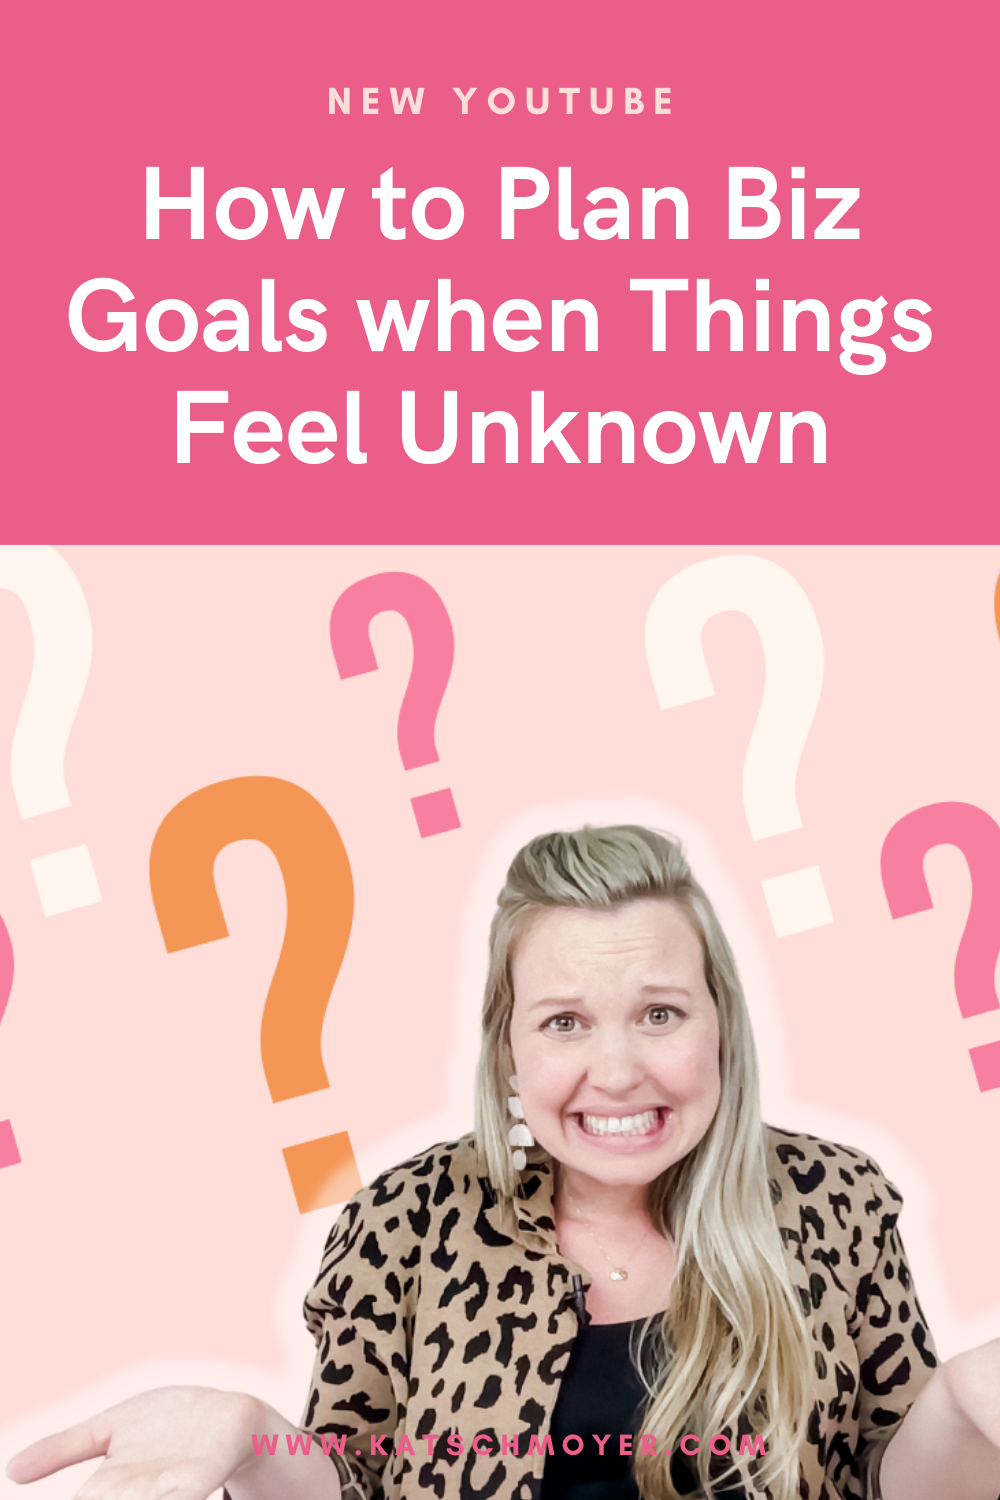 How to Plan Biz Goals when Things Feel Unknown